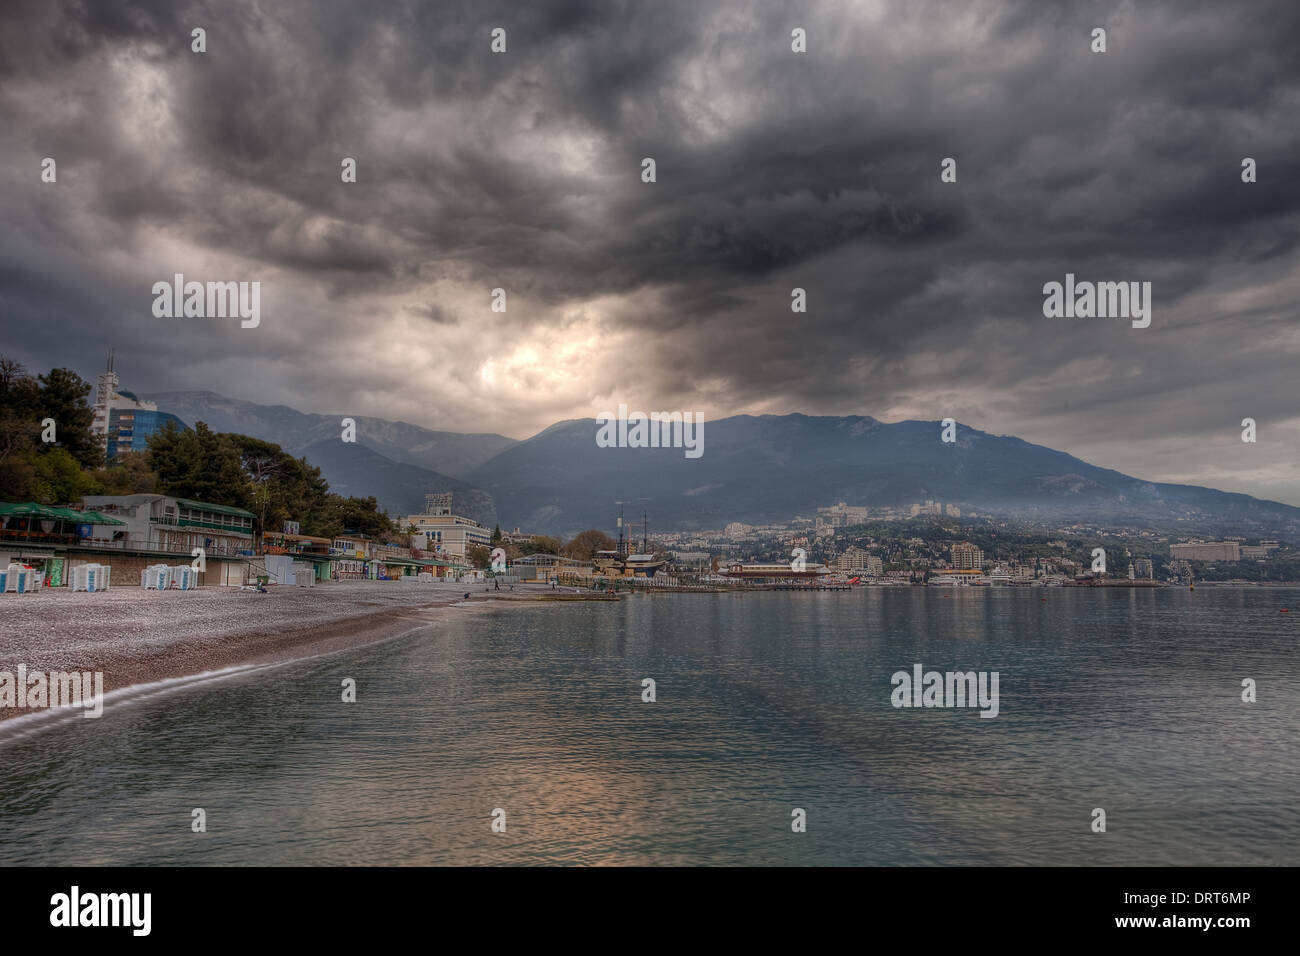 Stormy weather clouds Stock Photo